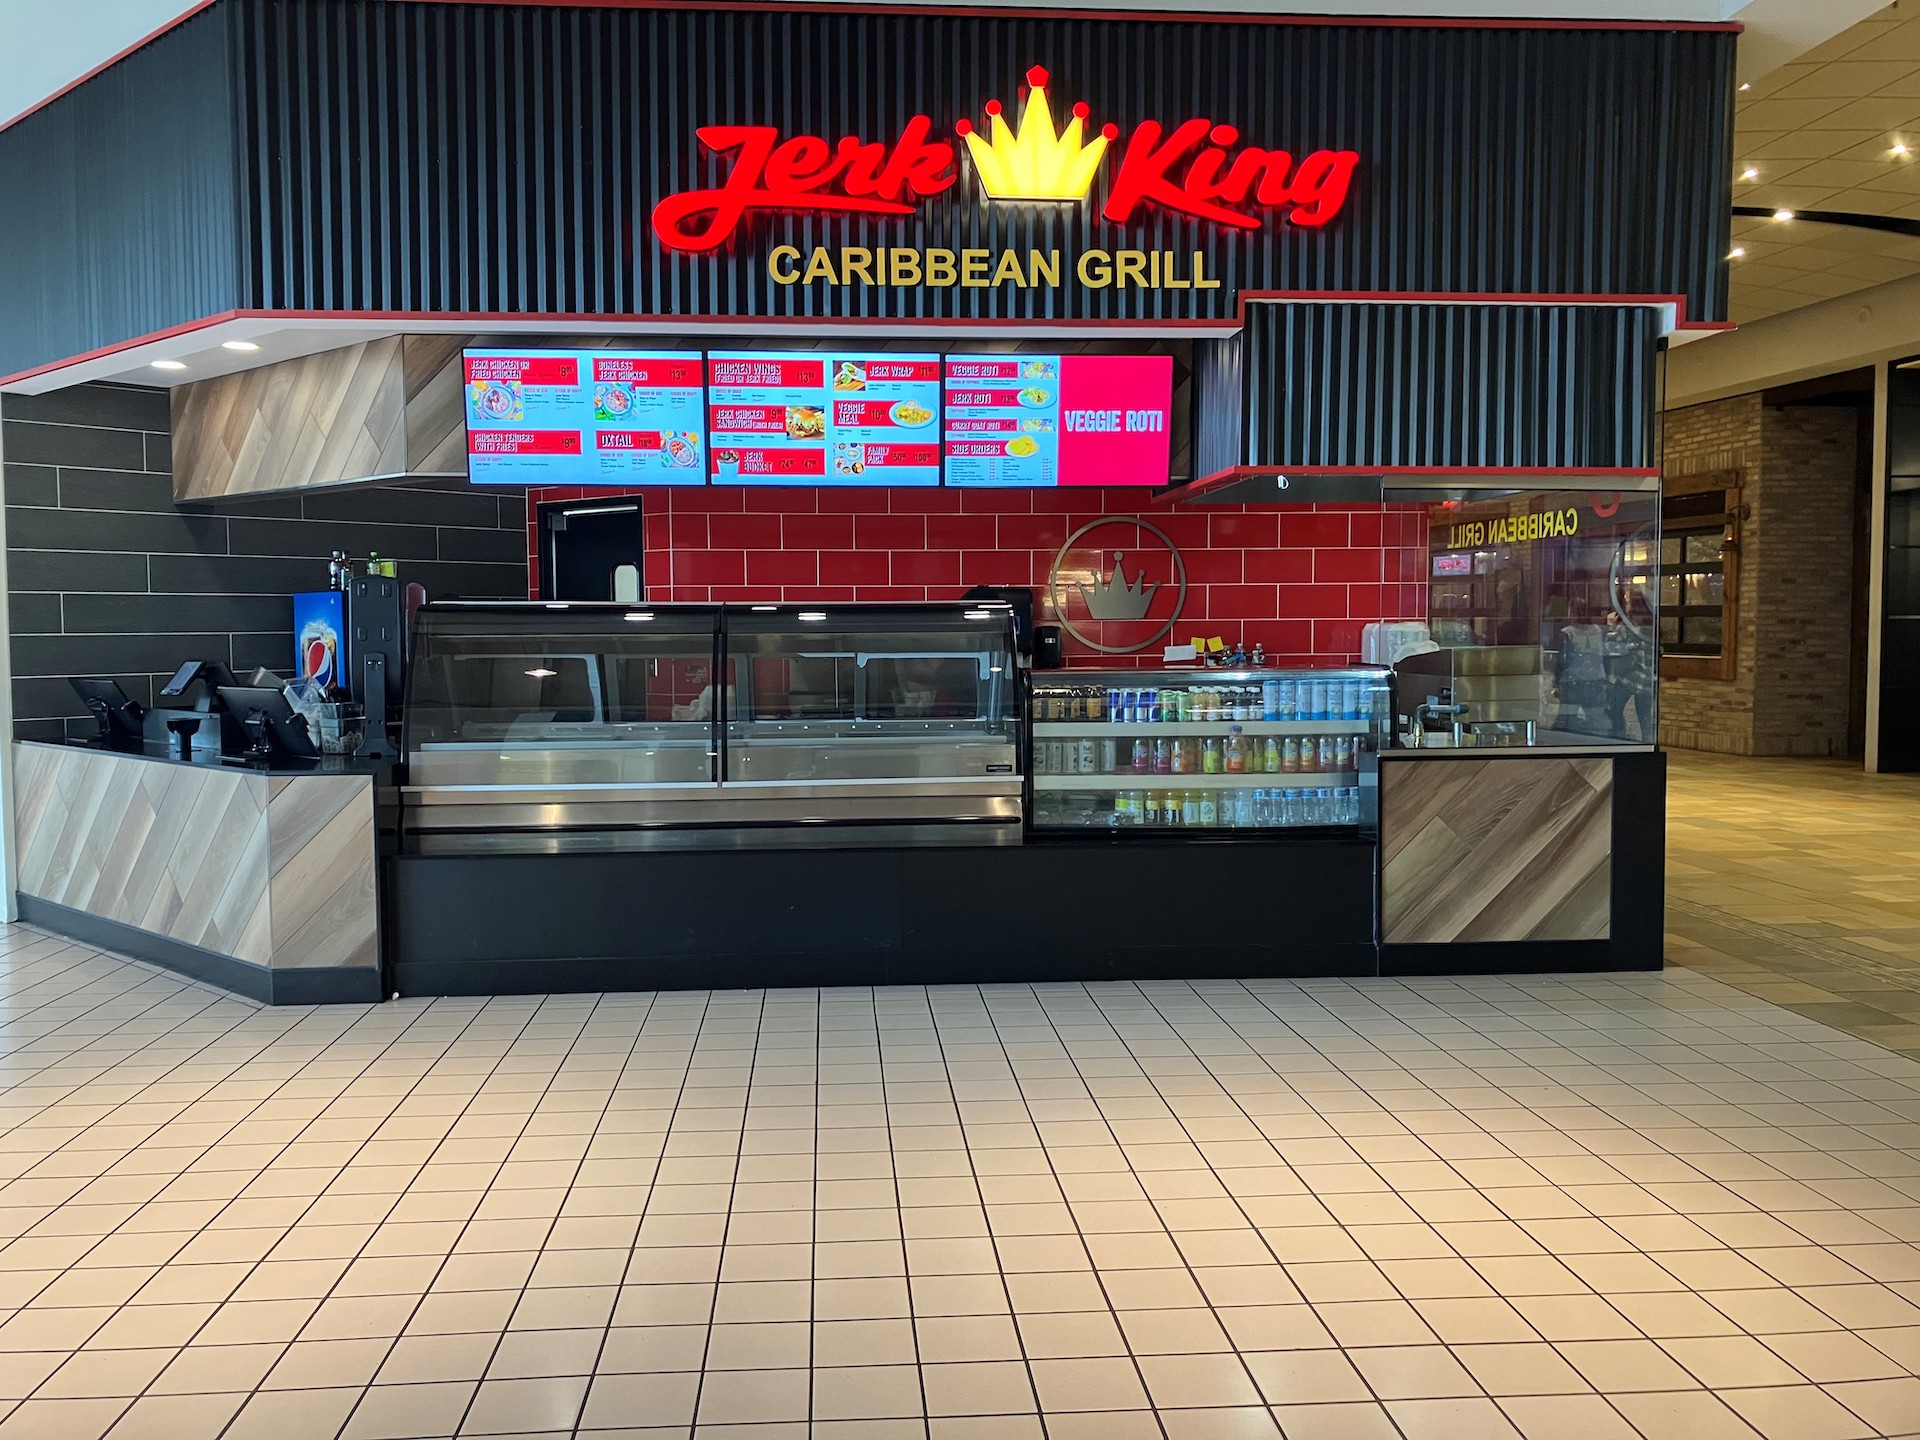 A restaurant in a food court with custom-made millwork and a well-lit food display case.